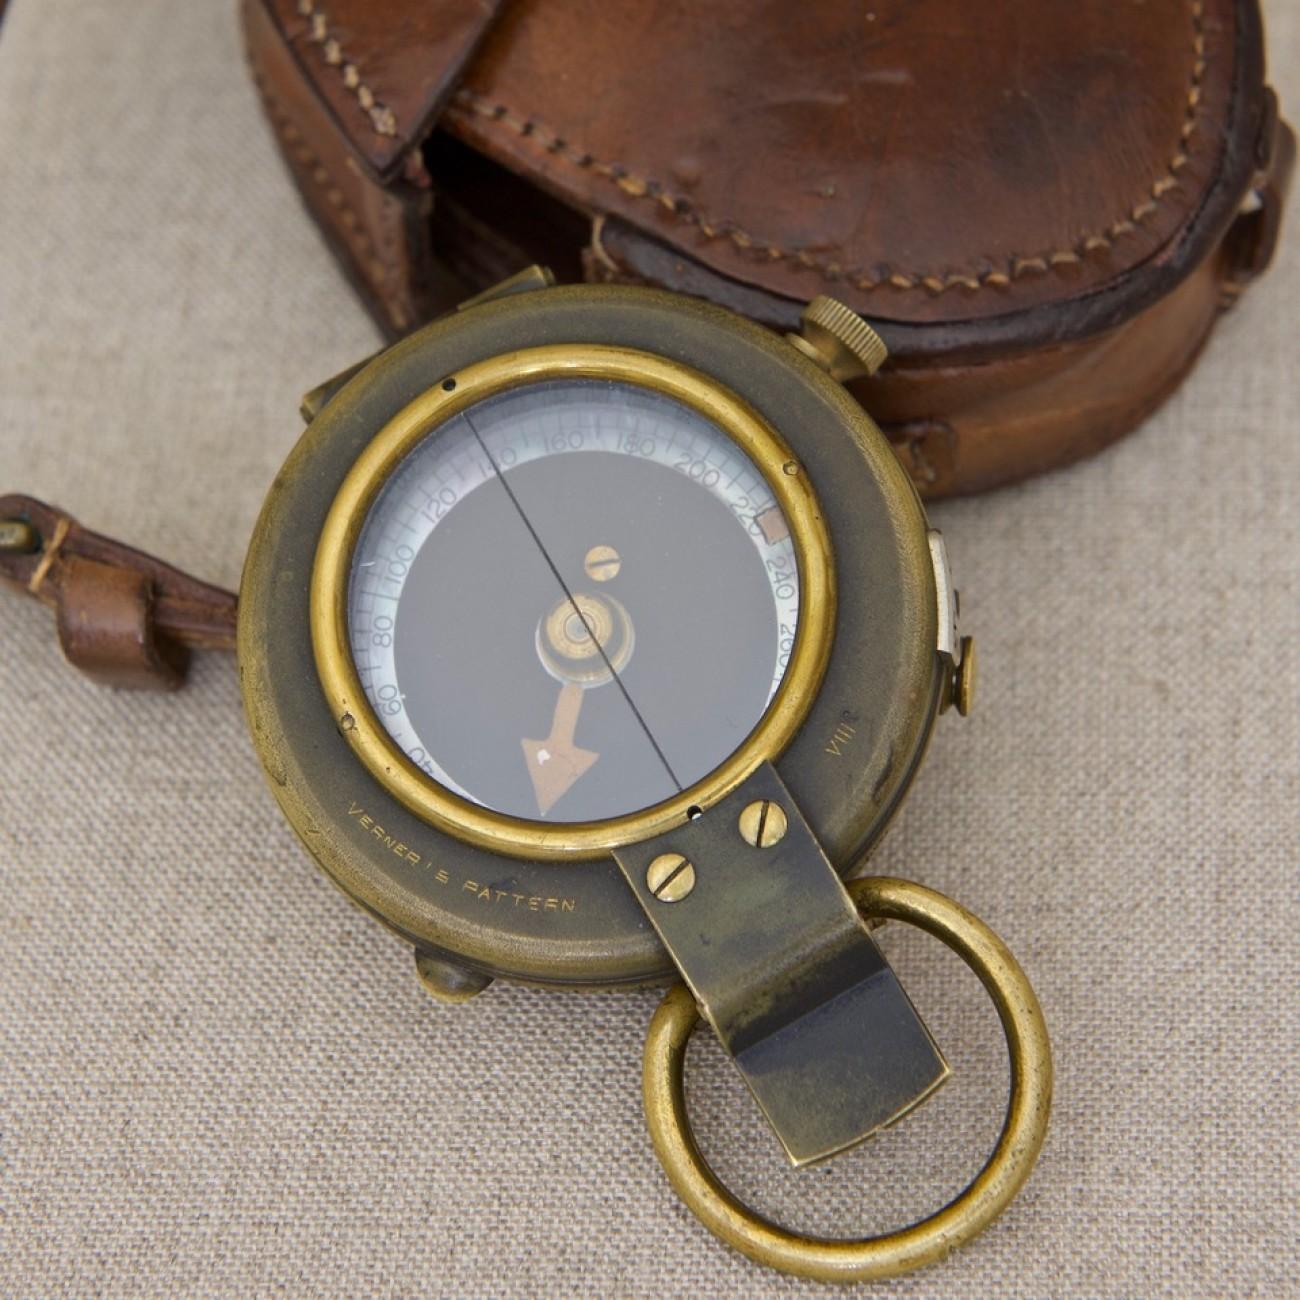 A type VIII ‘Verner’s Pattern’ military compass. This British military compass is called Verner's pattern after its designer's name, Colonel William Willoughby Cole Verner. 
It has a brass case, Mother of Pearl dial (to enhance reading in low level